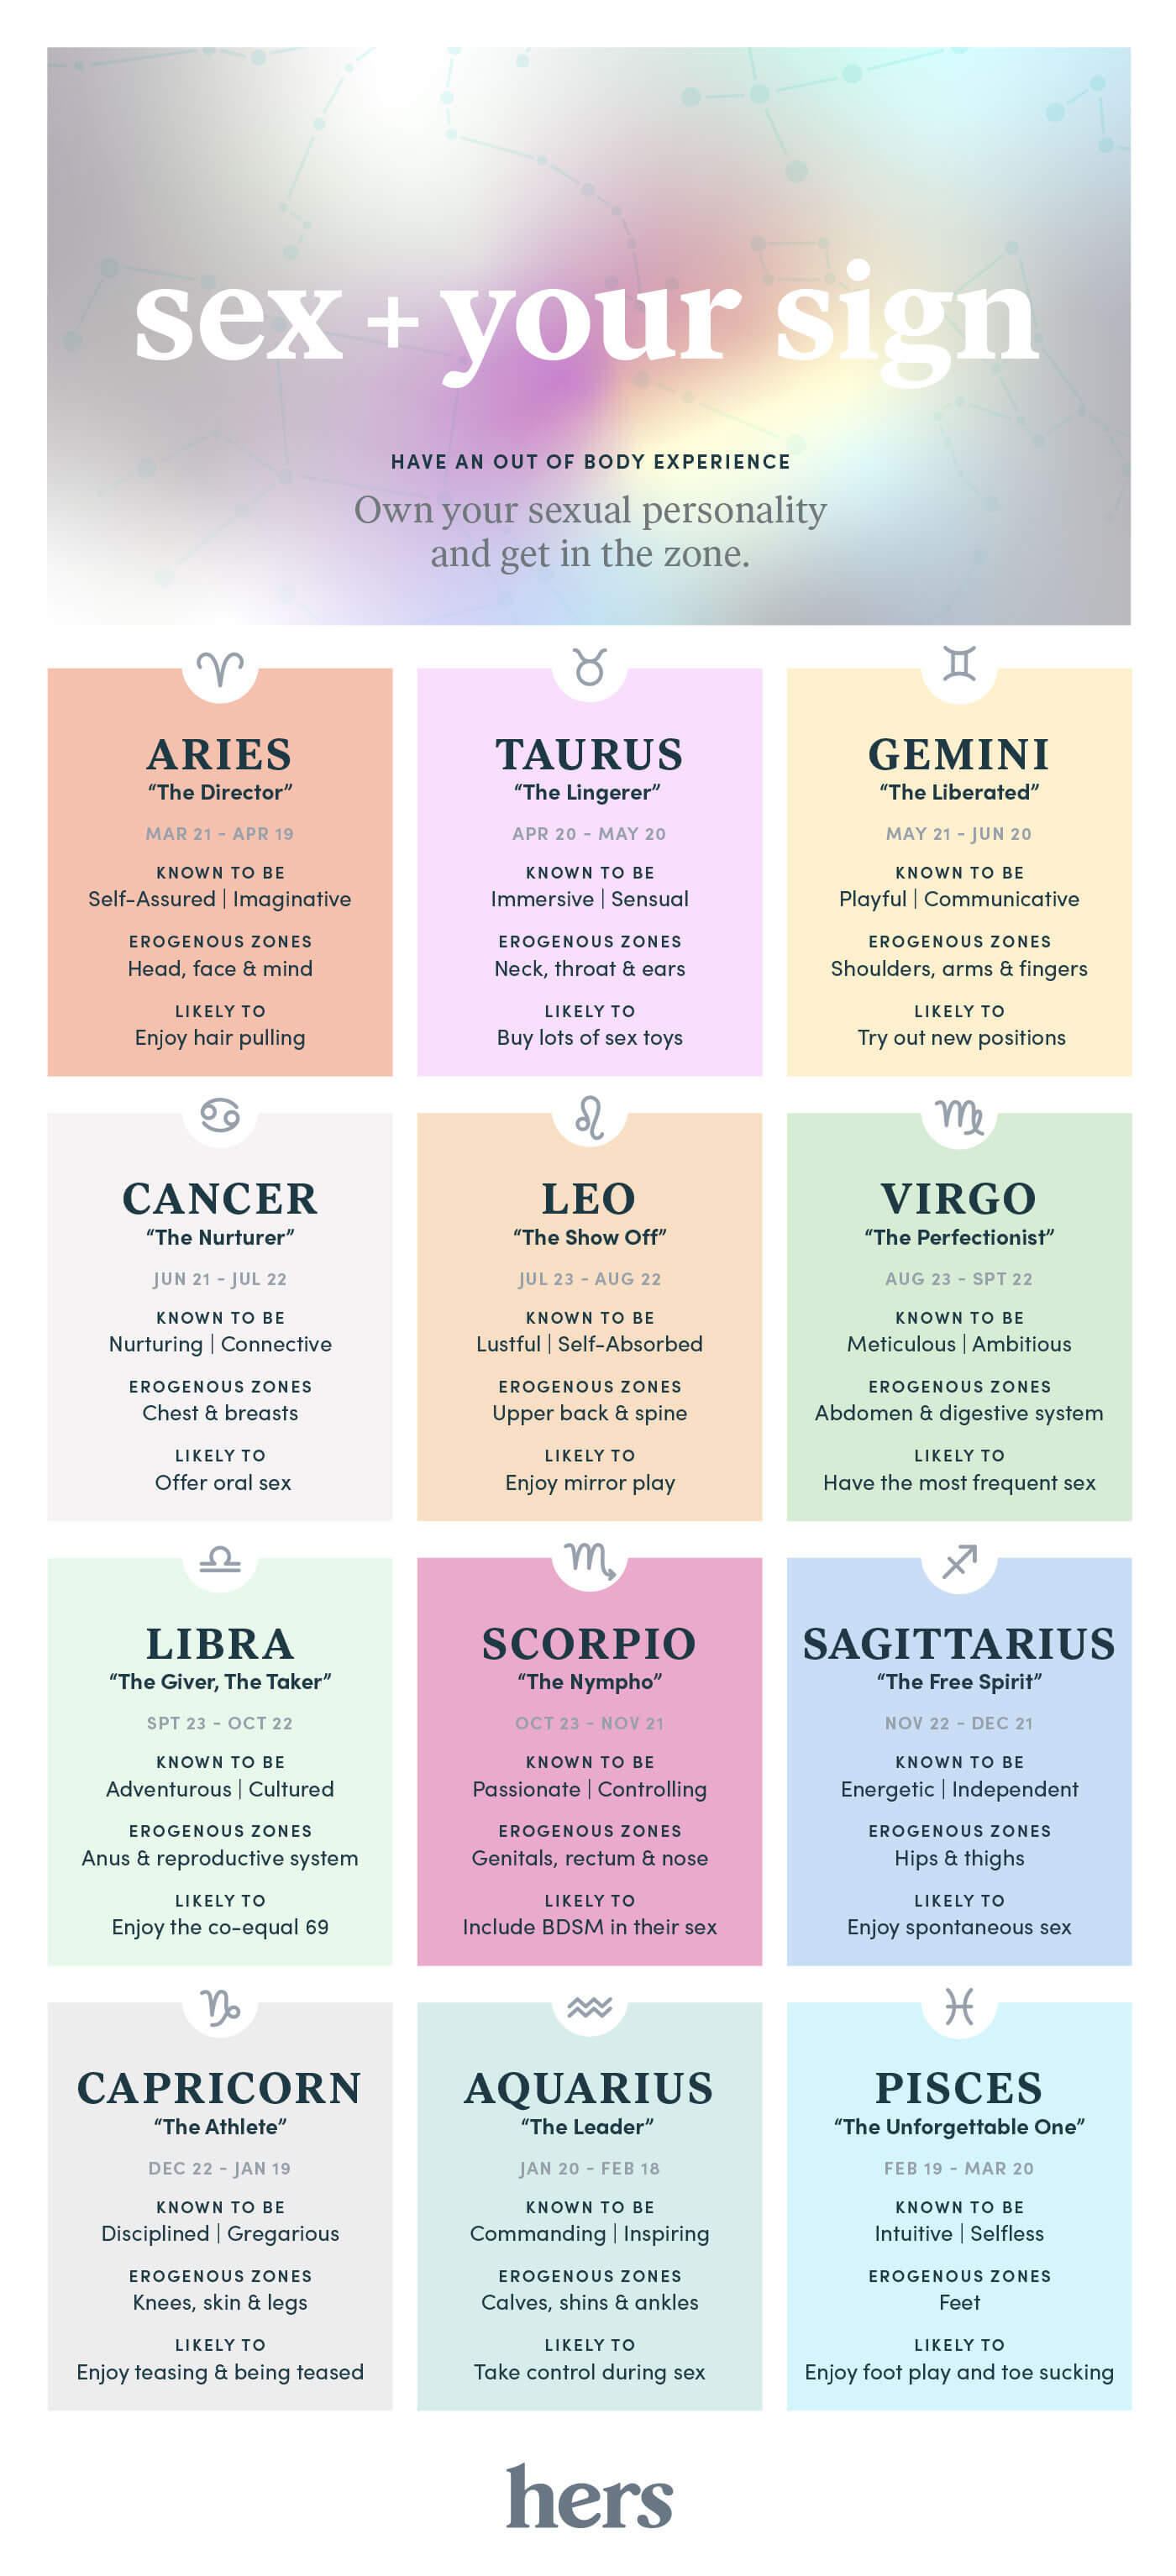 Zodiac is compatible aquarius sign what most with Aquarius and